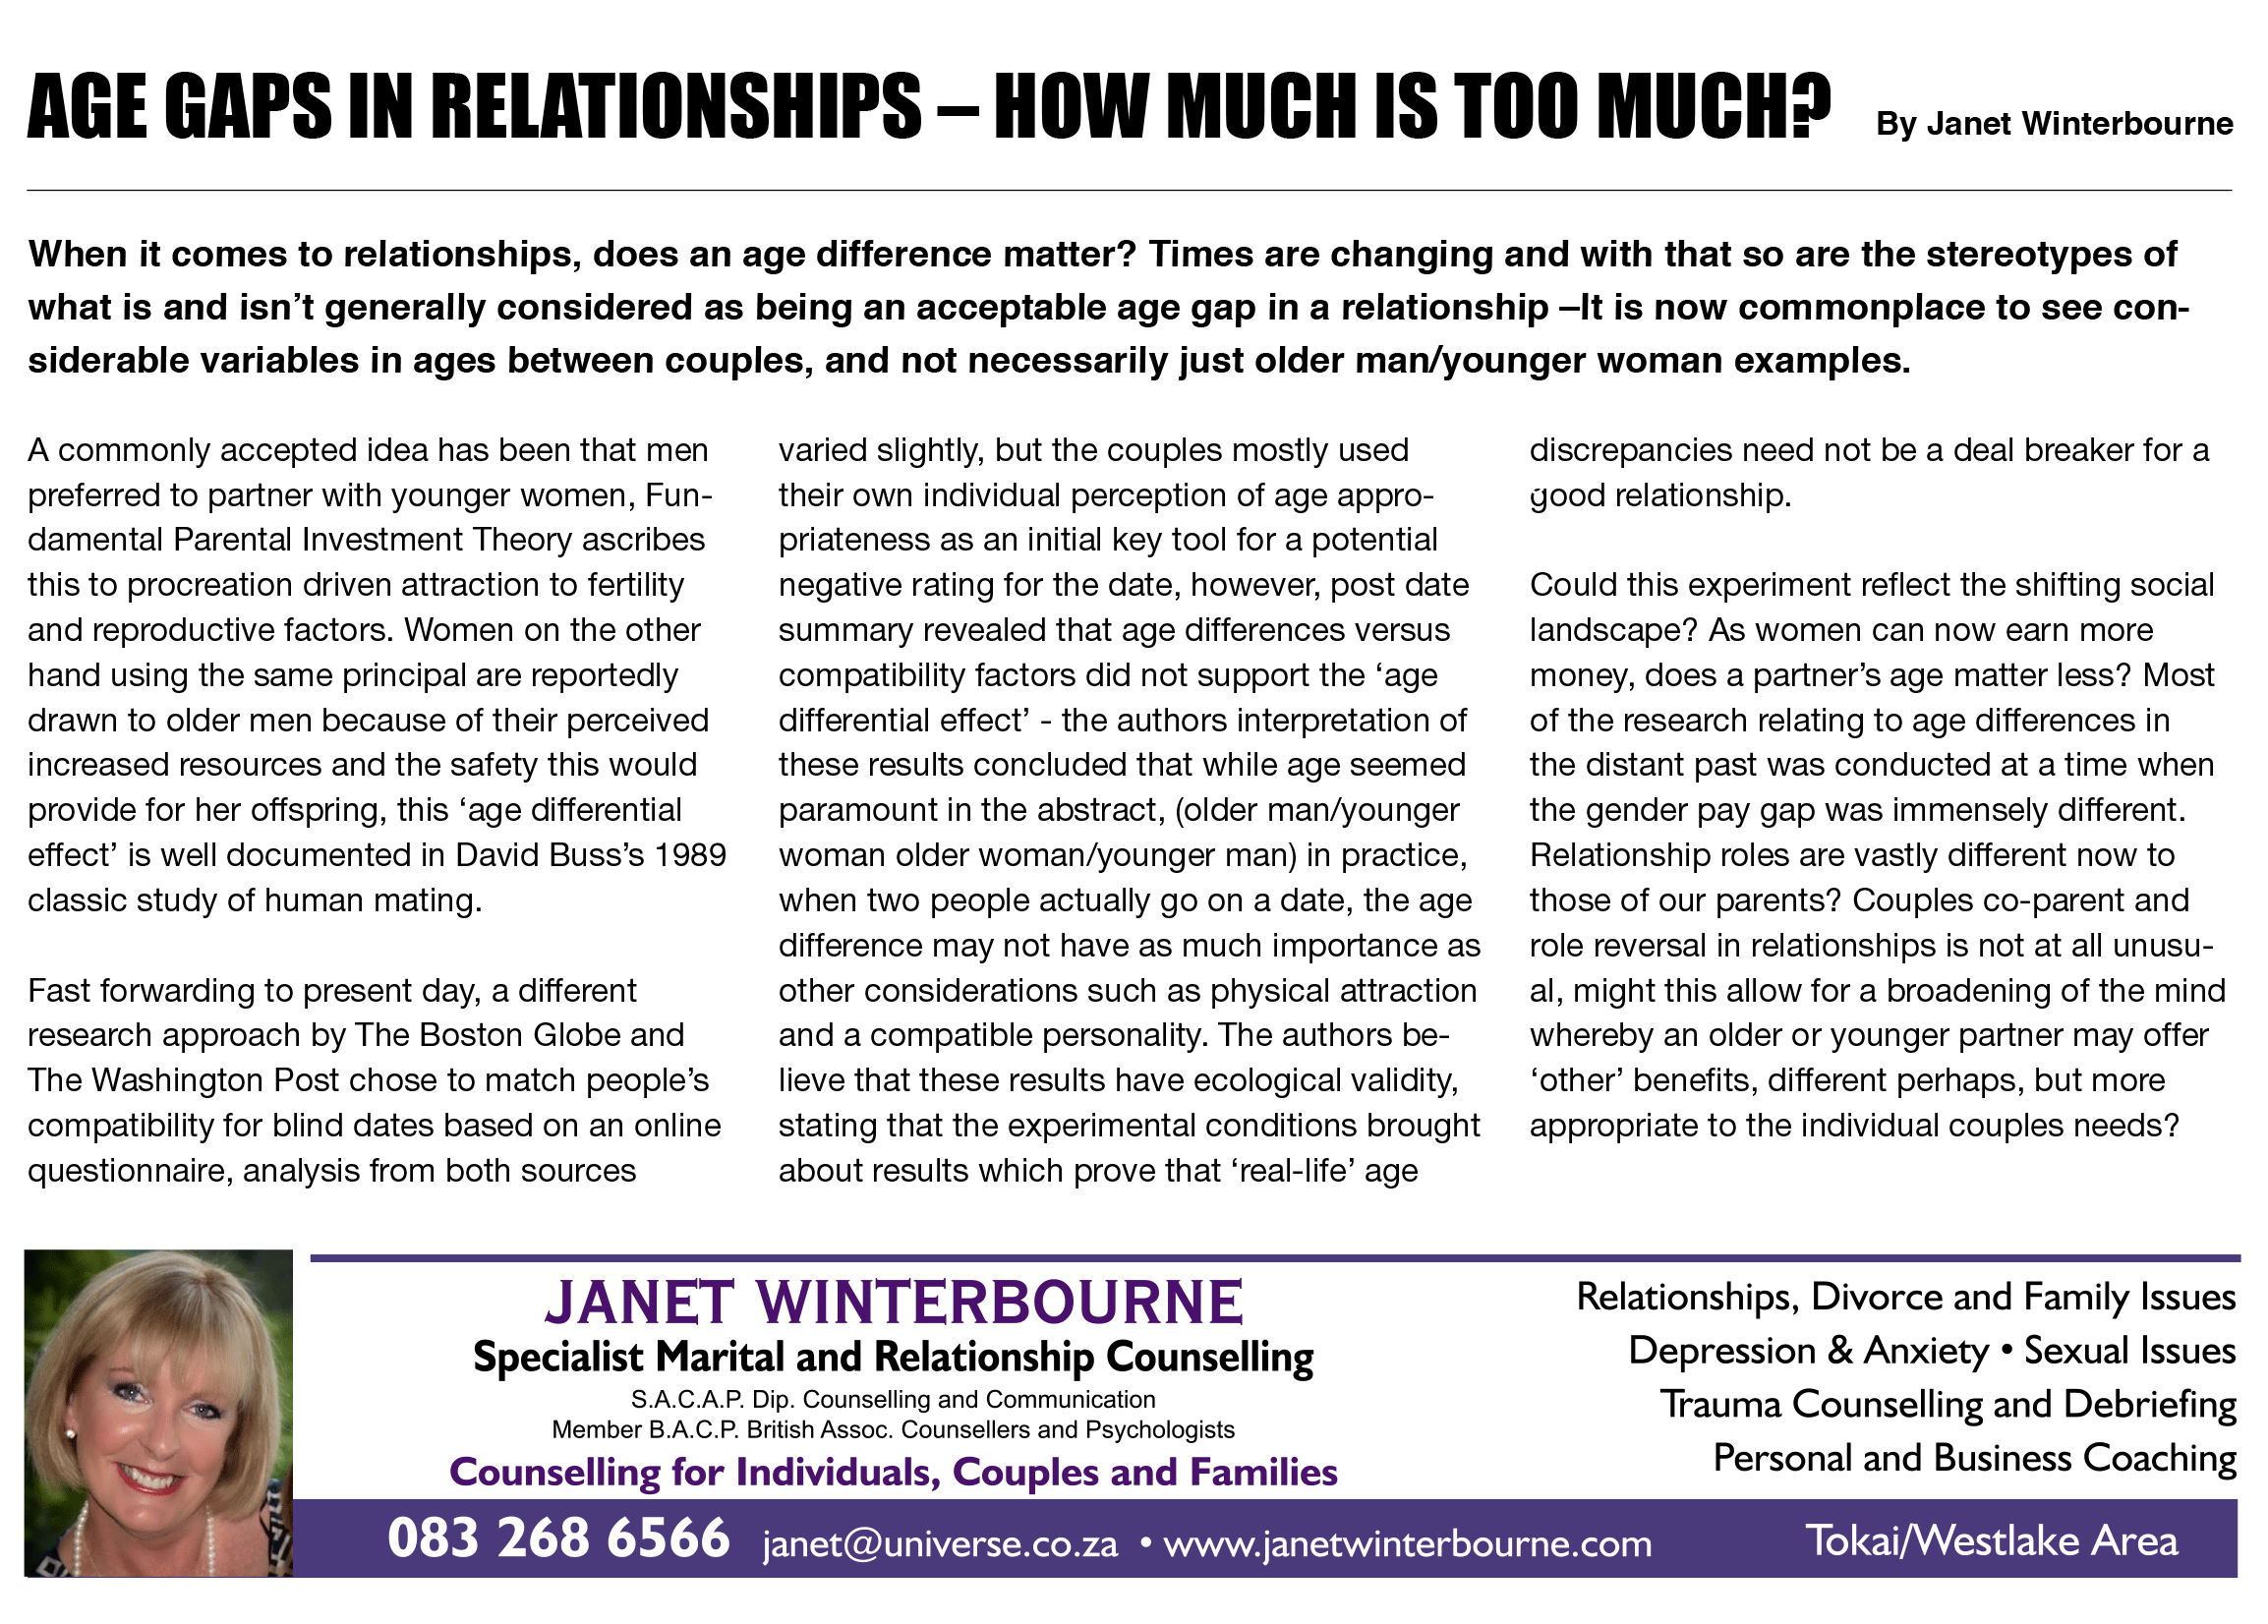 AGE GAPS IN RELATIONSHIPS – HOW MUCH IS TOO MUCH?